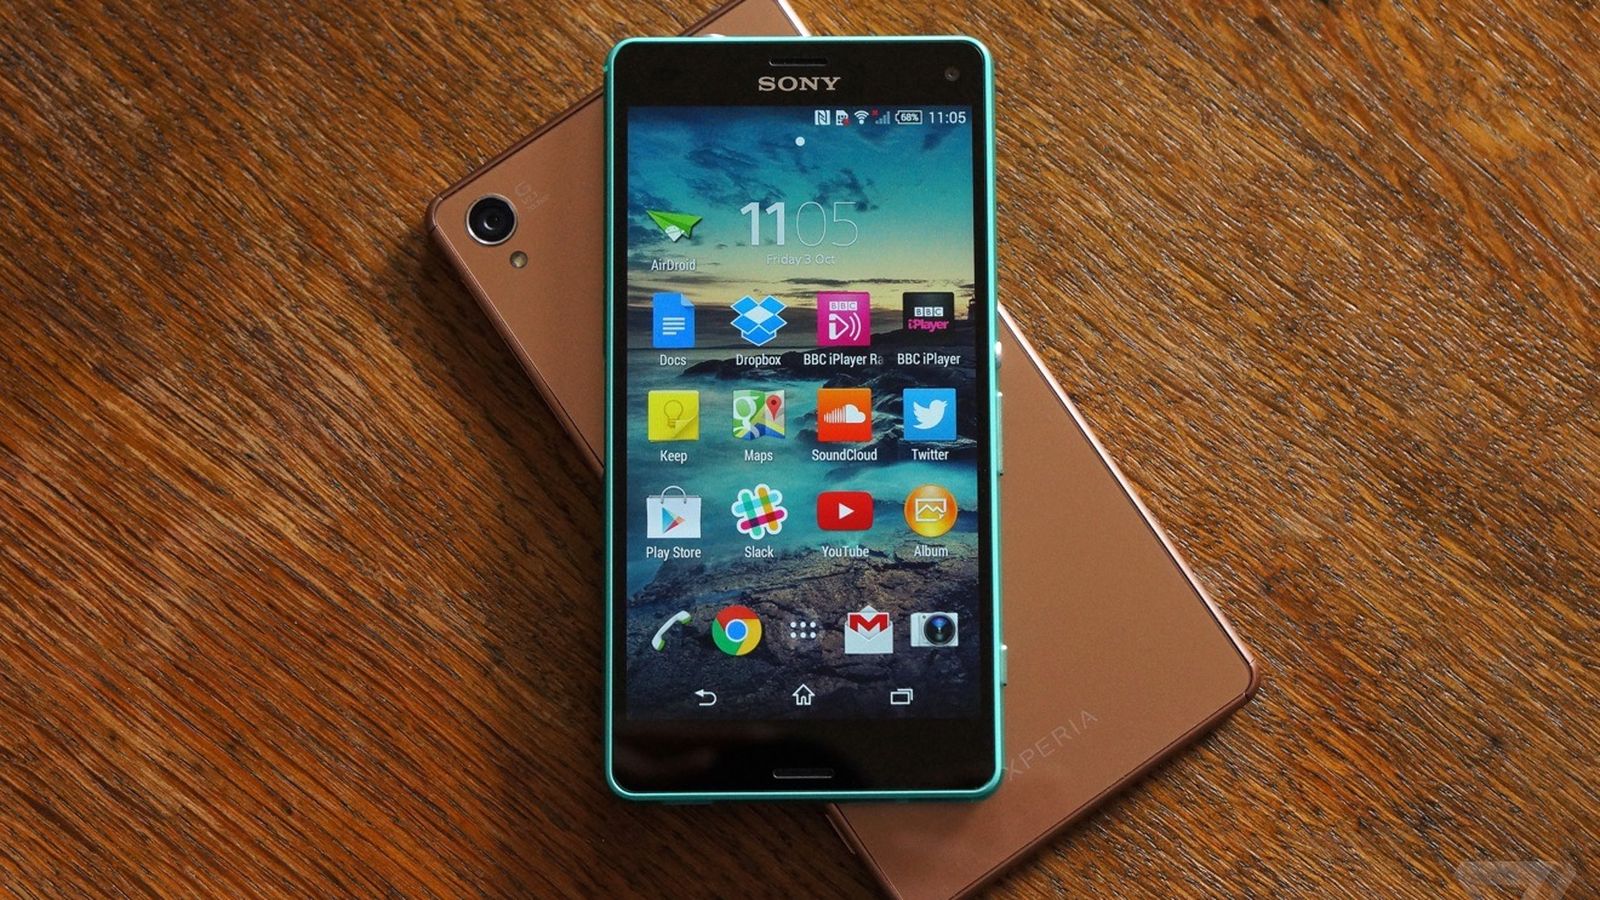 Sony Xperia Z3 With Its New Specification, Design and Best Gaming Experience